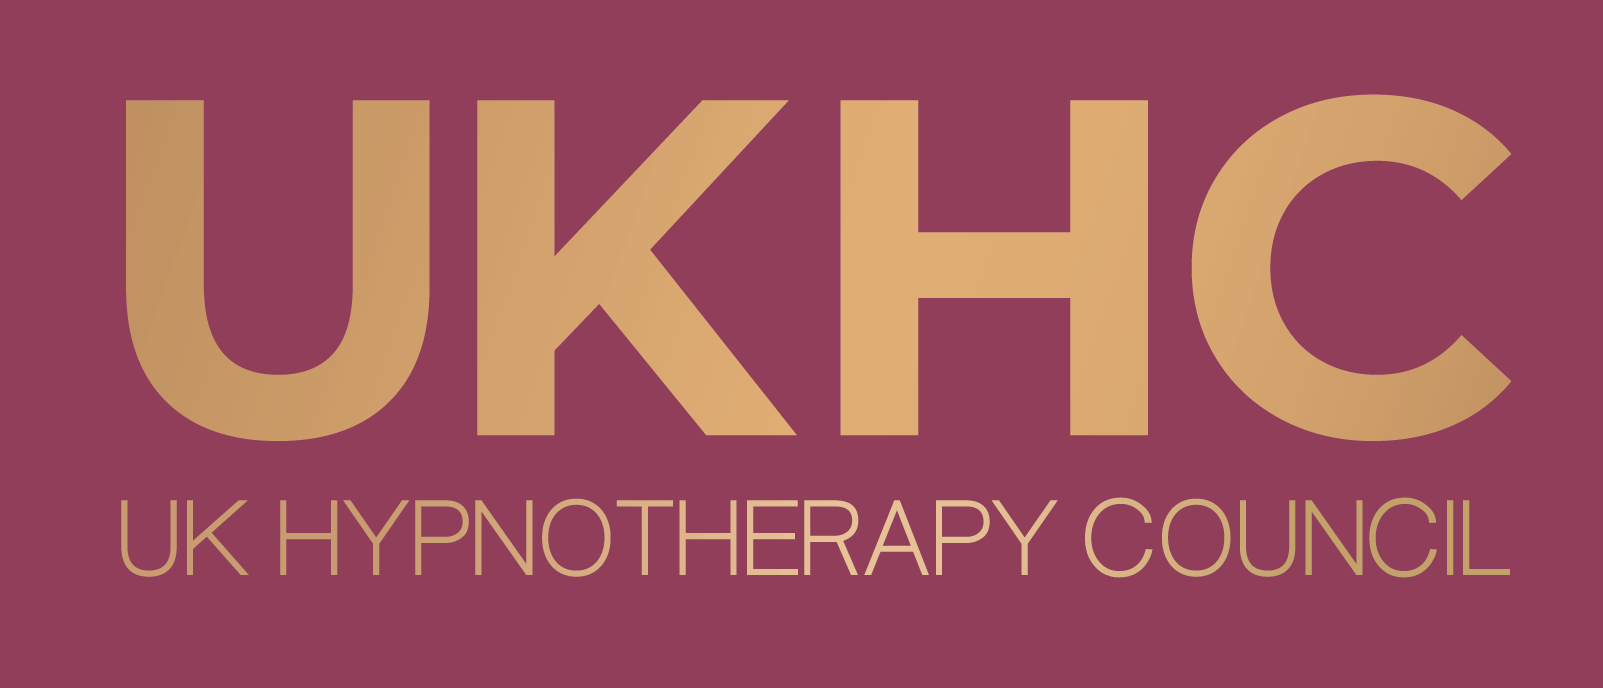 UK Hypnotherapy Council Image